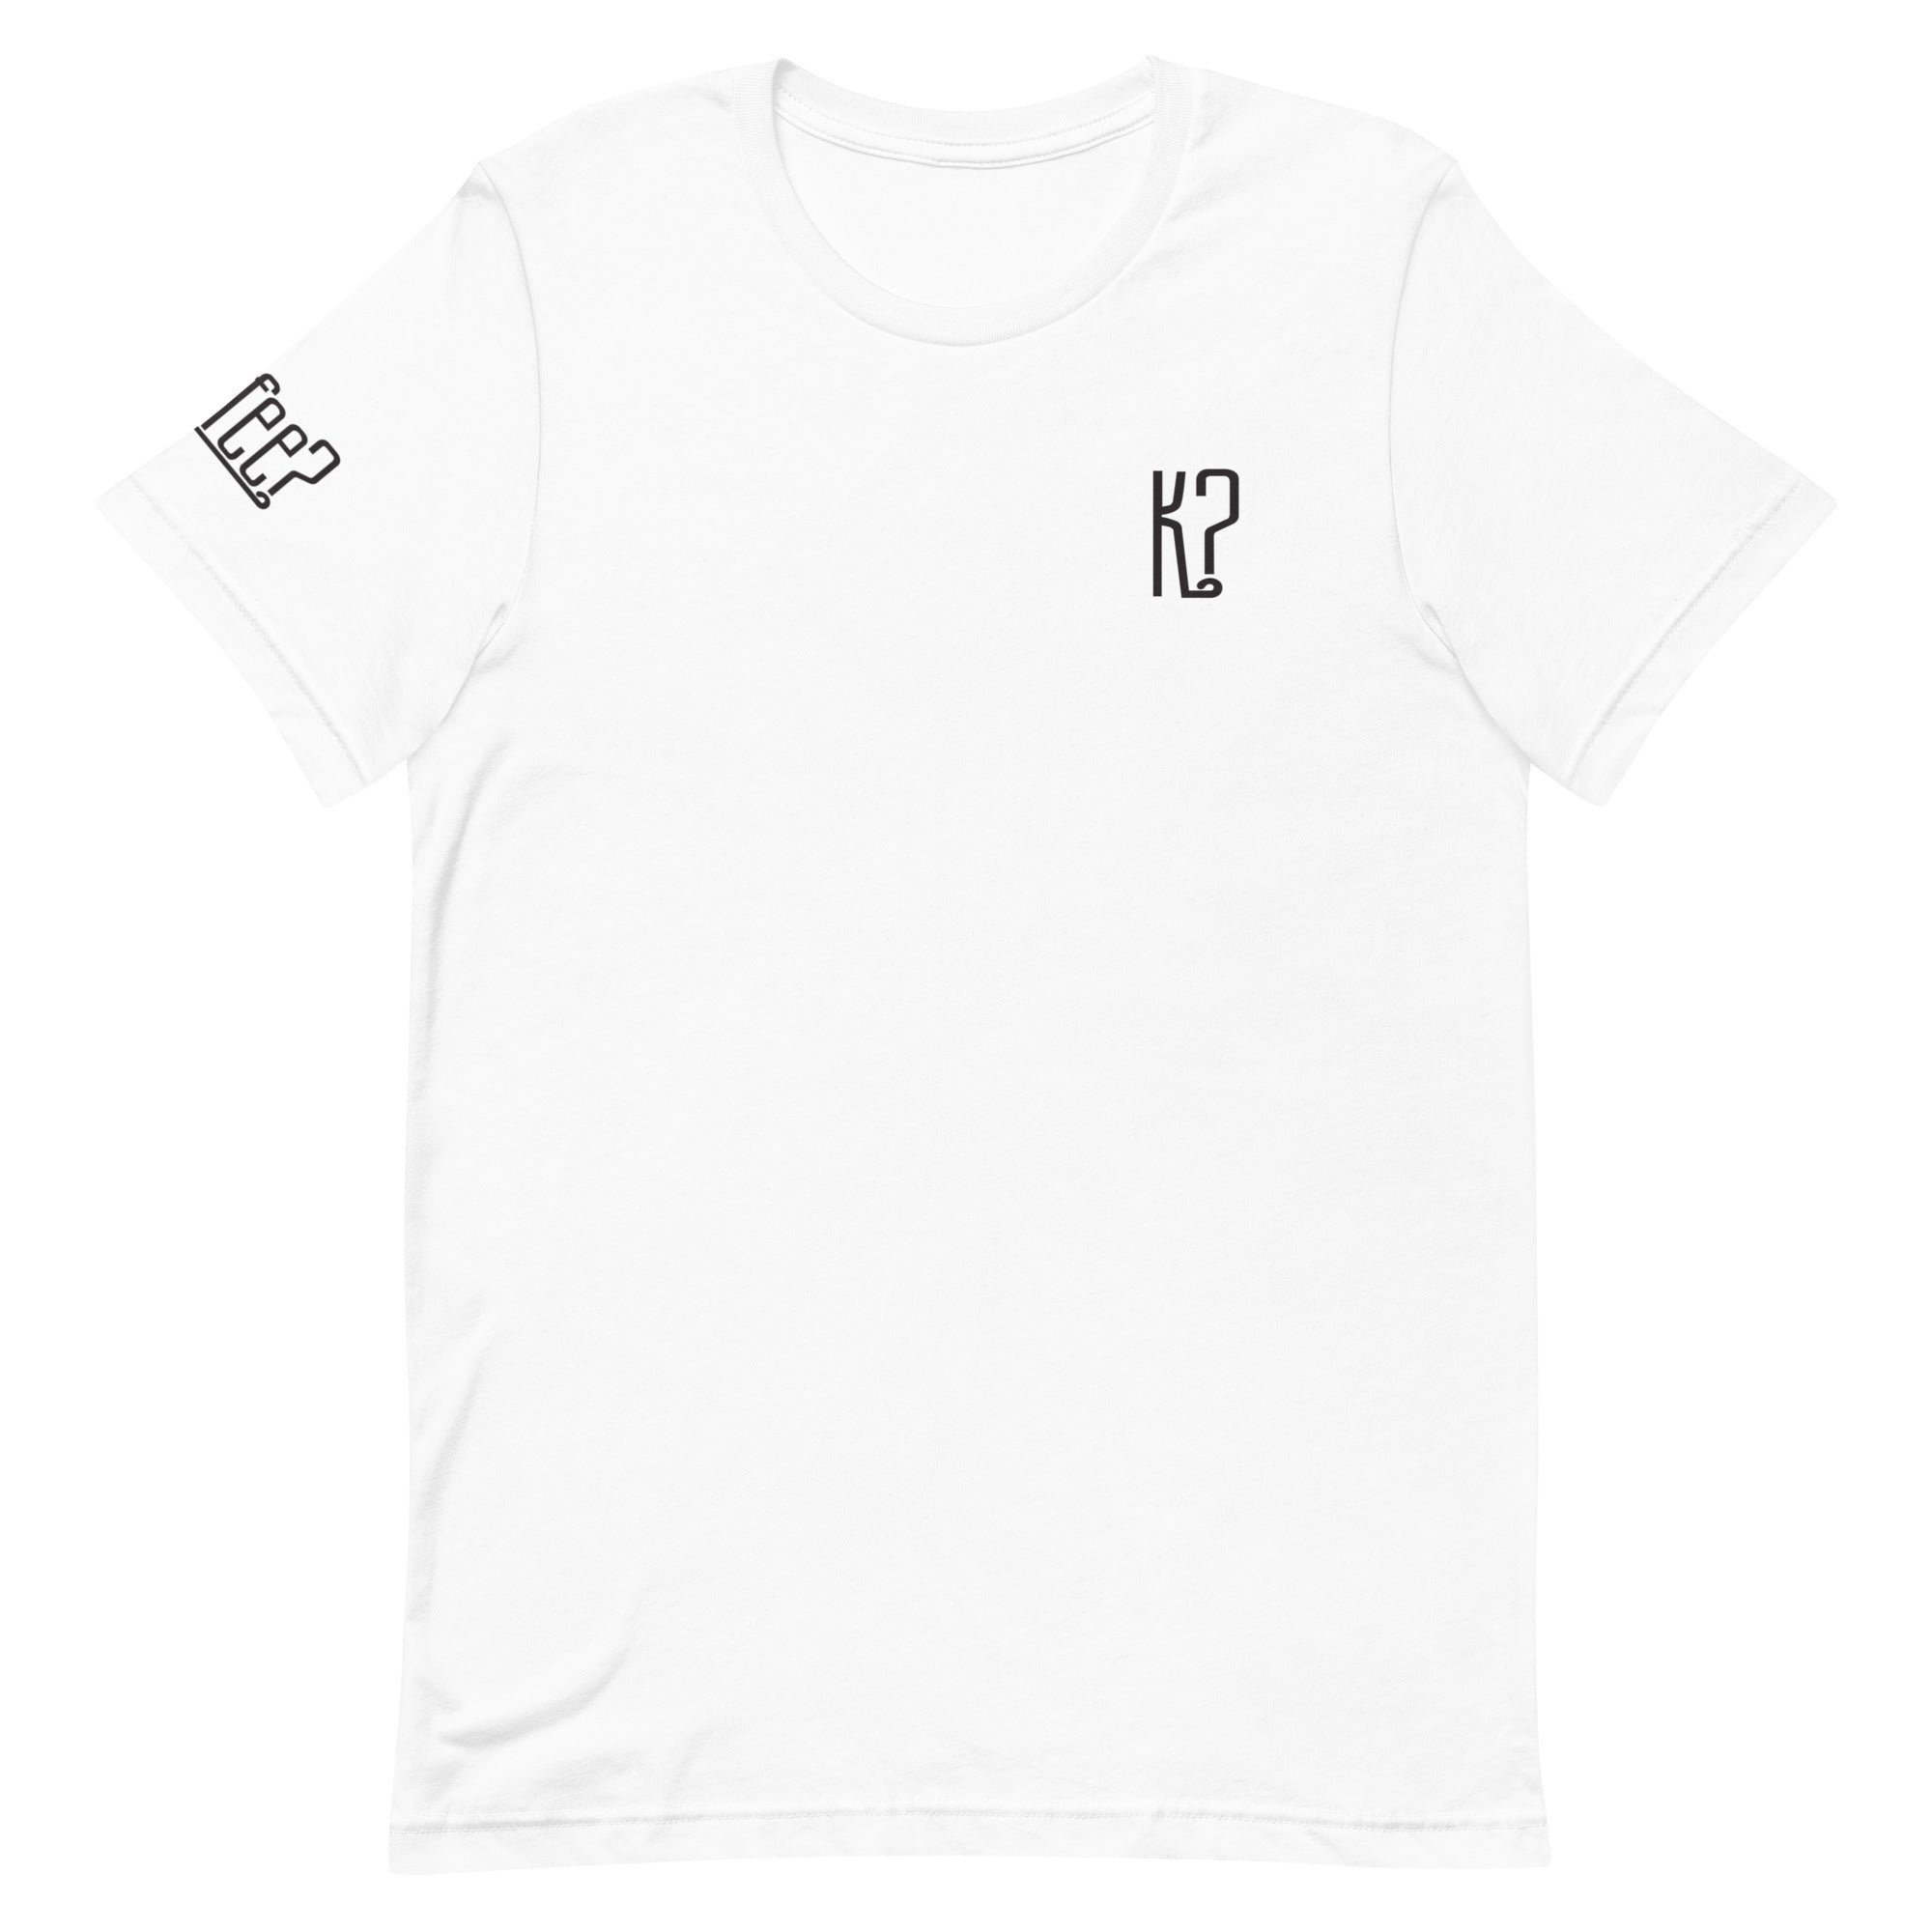 Koffee? "Dictionary" Tee in White